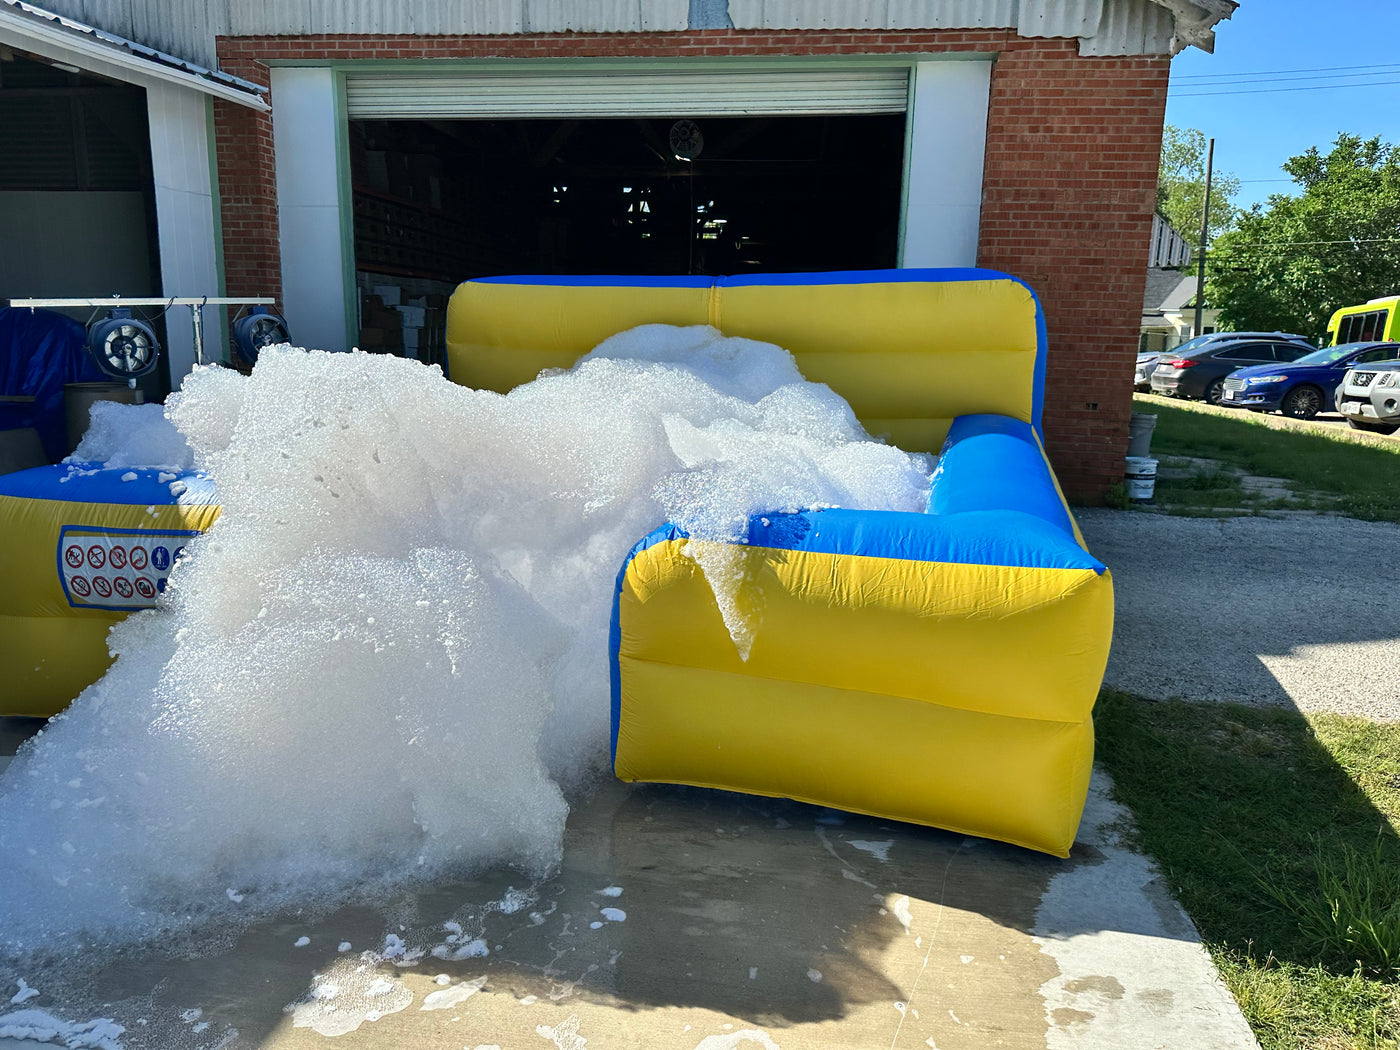 Foam Piles high with the 13 x 13 foam pit. No foam fan or stand required for this unit.